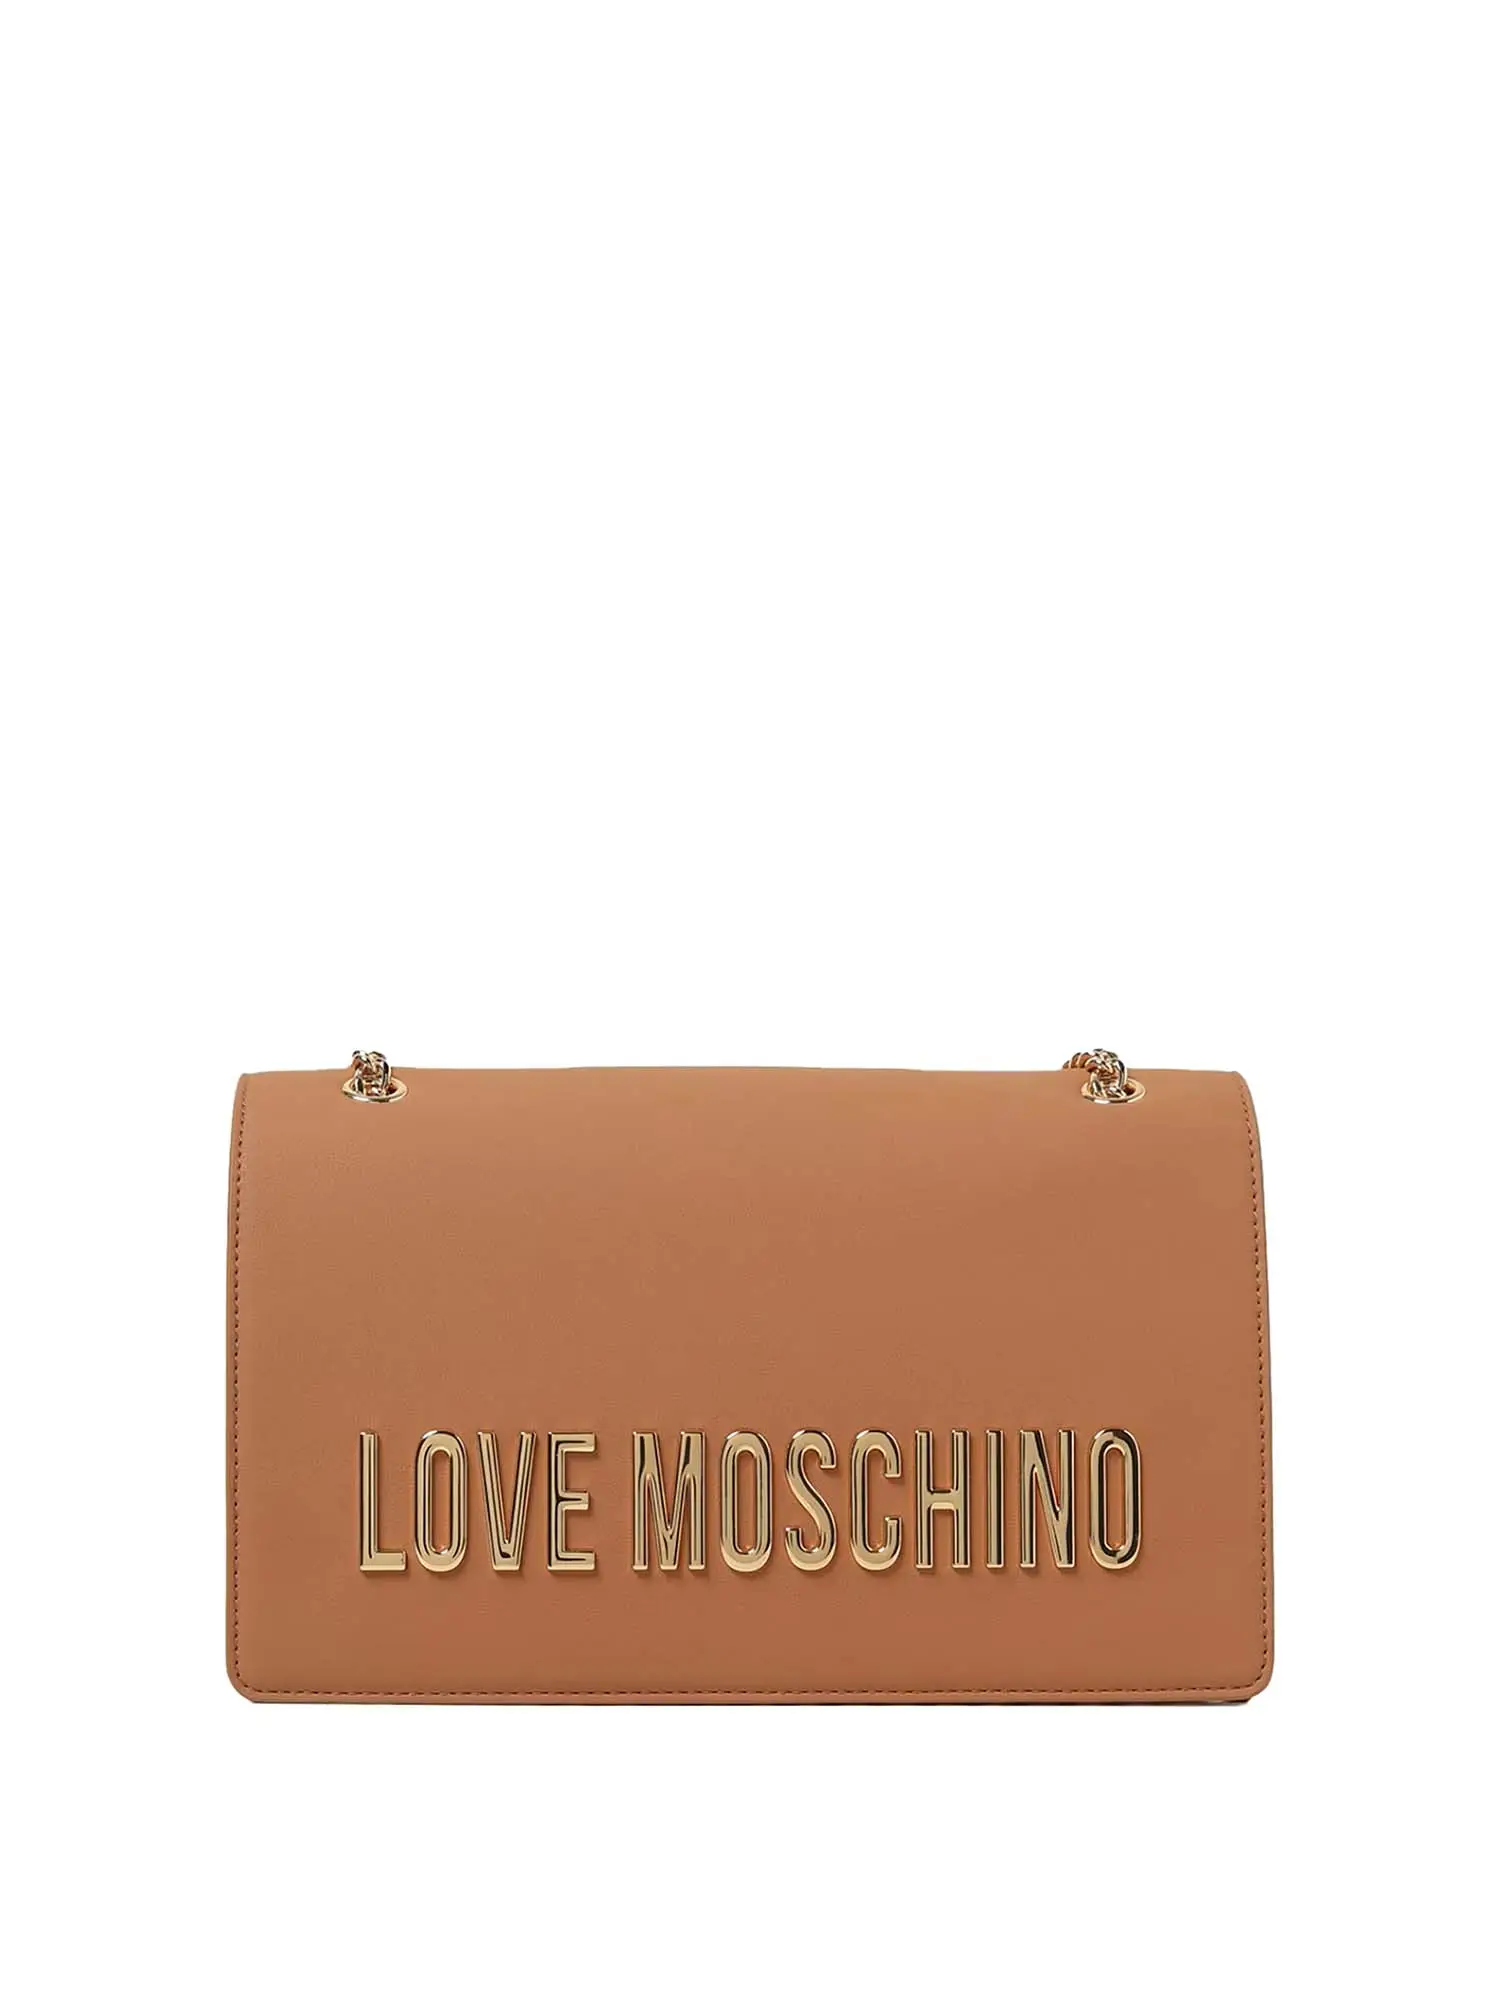 TRACOLLA DONNA - LOVE MOSCHINO - JC4192PP1IKD0 - CAMEL, UNICA